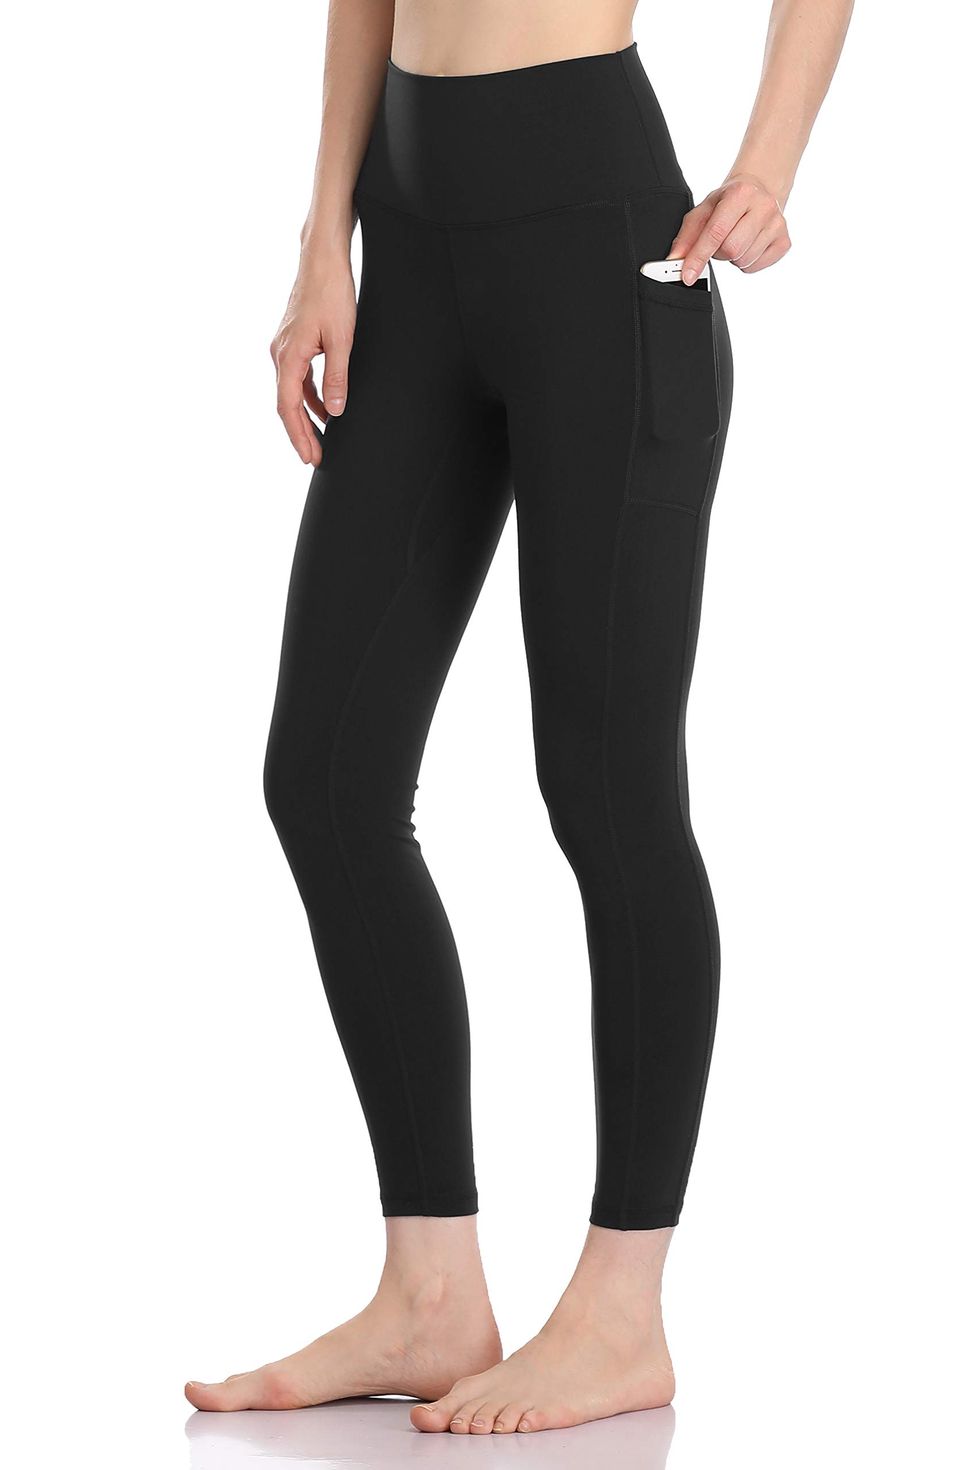 Women's High Waisted Tummy Control Workout Leggings 